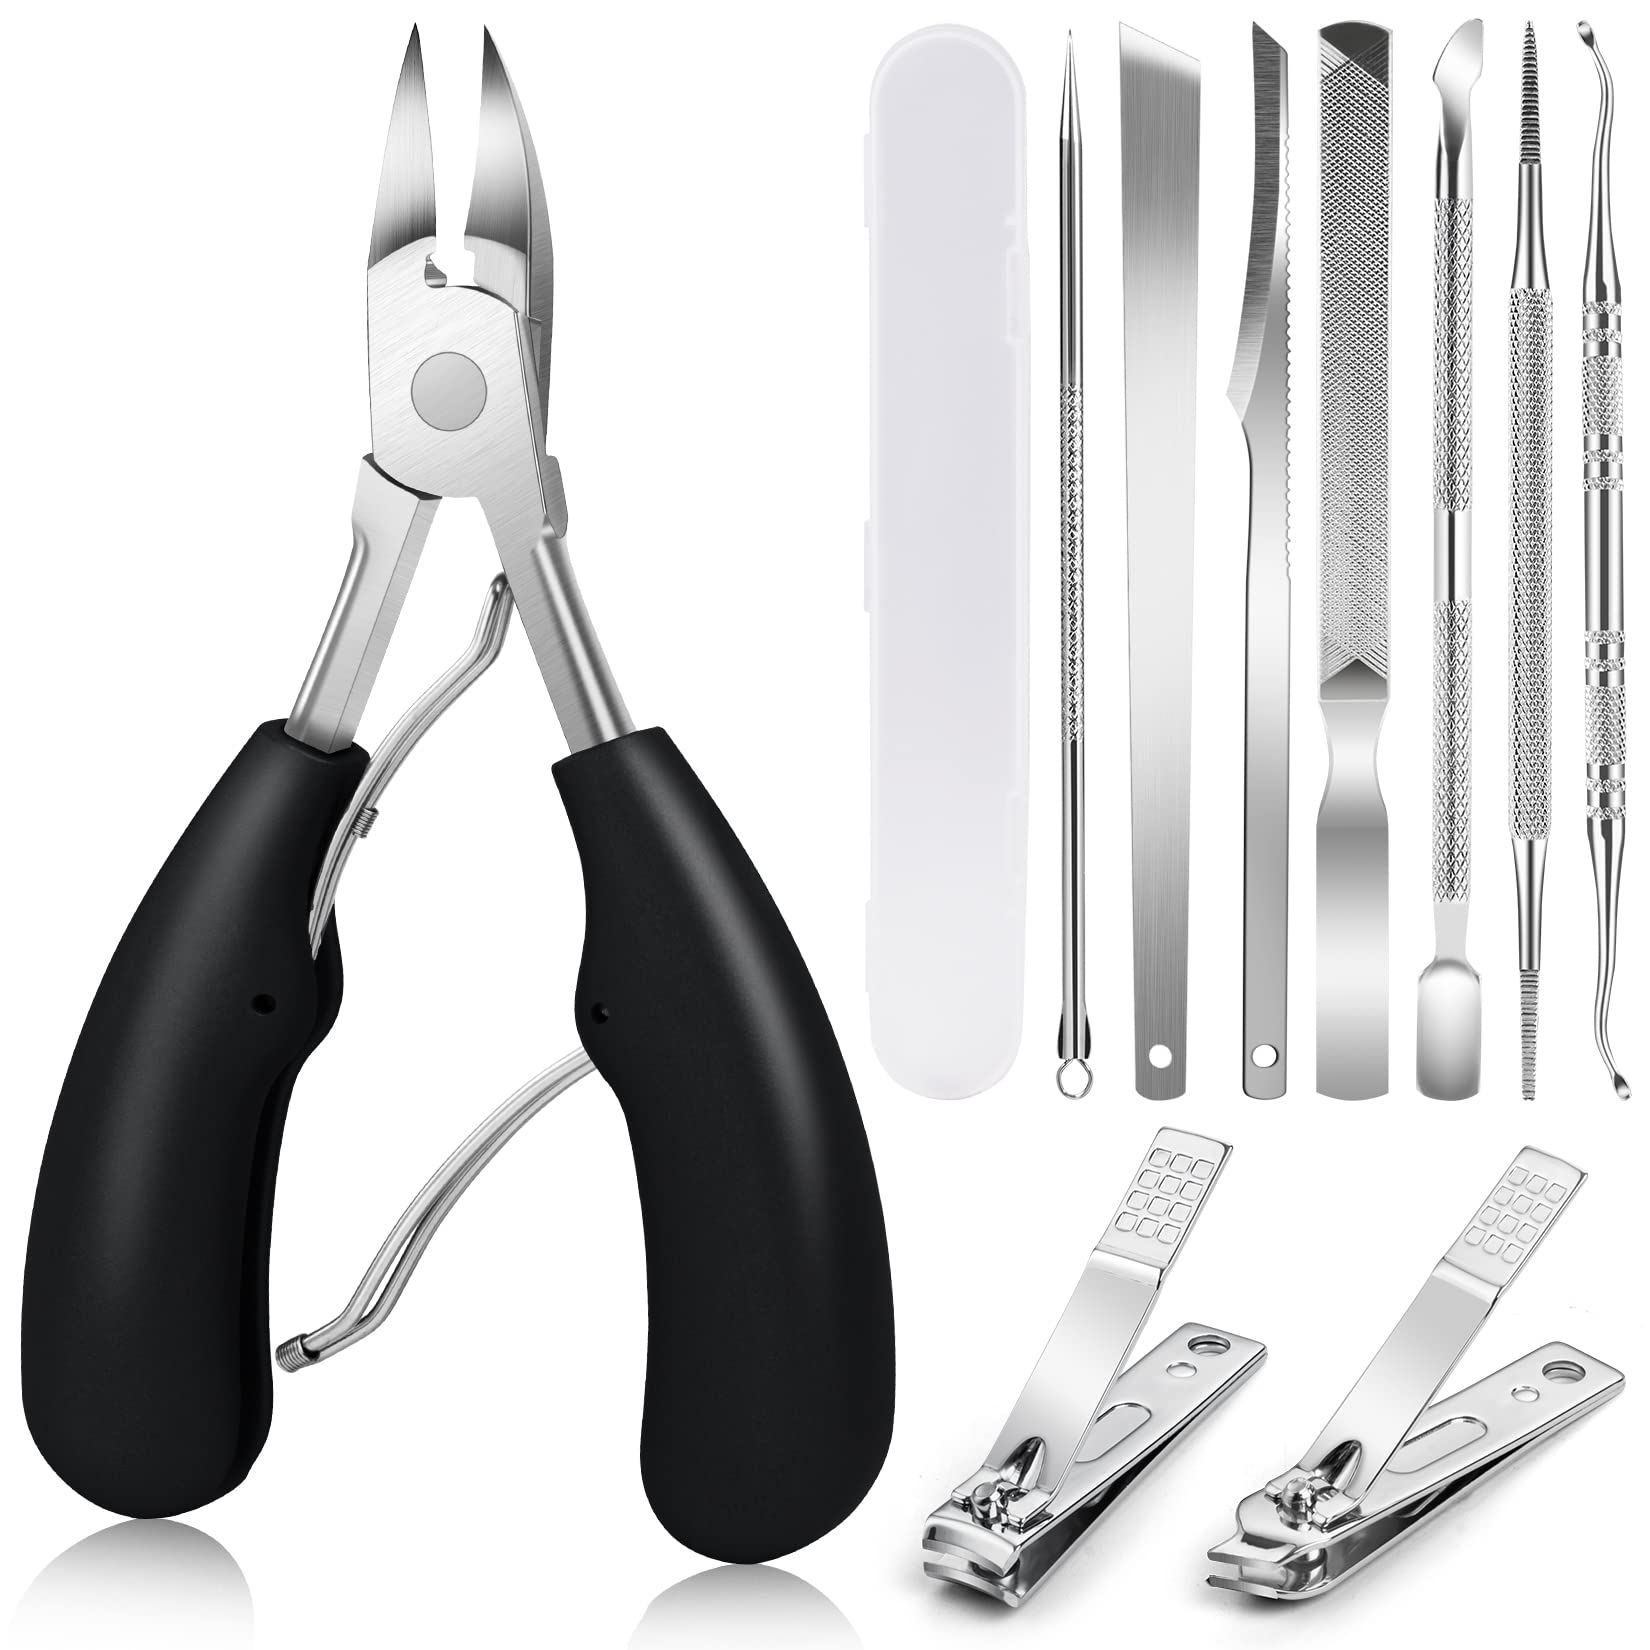 FERYES Toenail Clippers for Thick, Ingrown Toenails - Large Handle Toenail  Cutters, Ingrown Tools 4R13 Stainless Steel Nail Clippers - Black